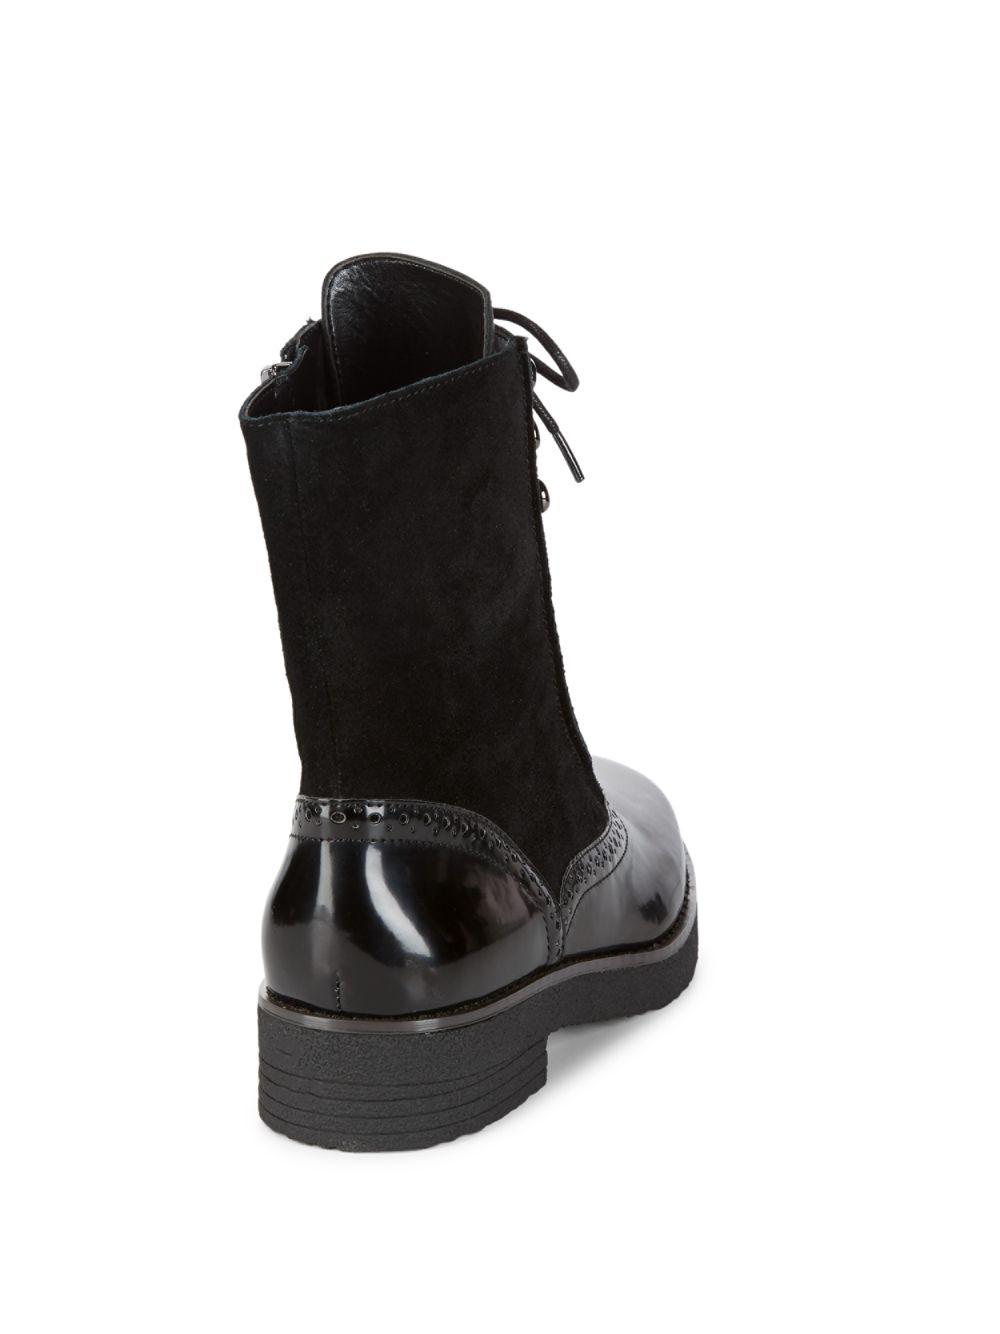 French Connection Leather Polished Combat Boots in Black - Lyst